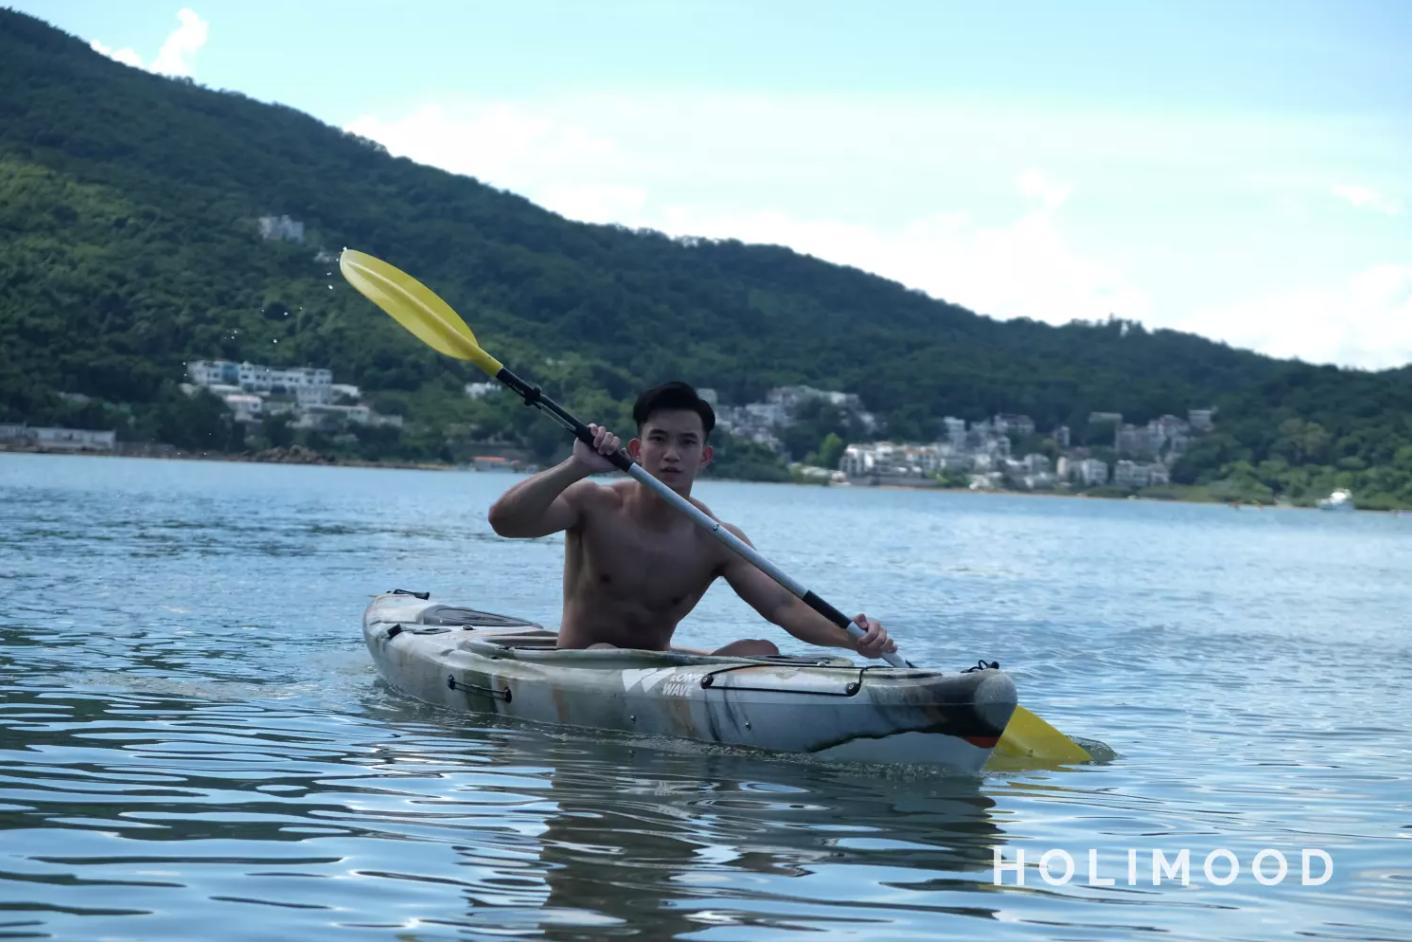 【Sai Kung】Kayaking Experience with Guidance - Charter (min. 8 pax)